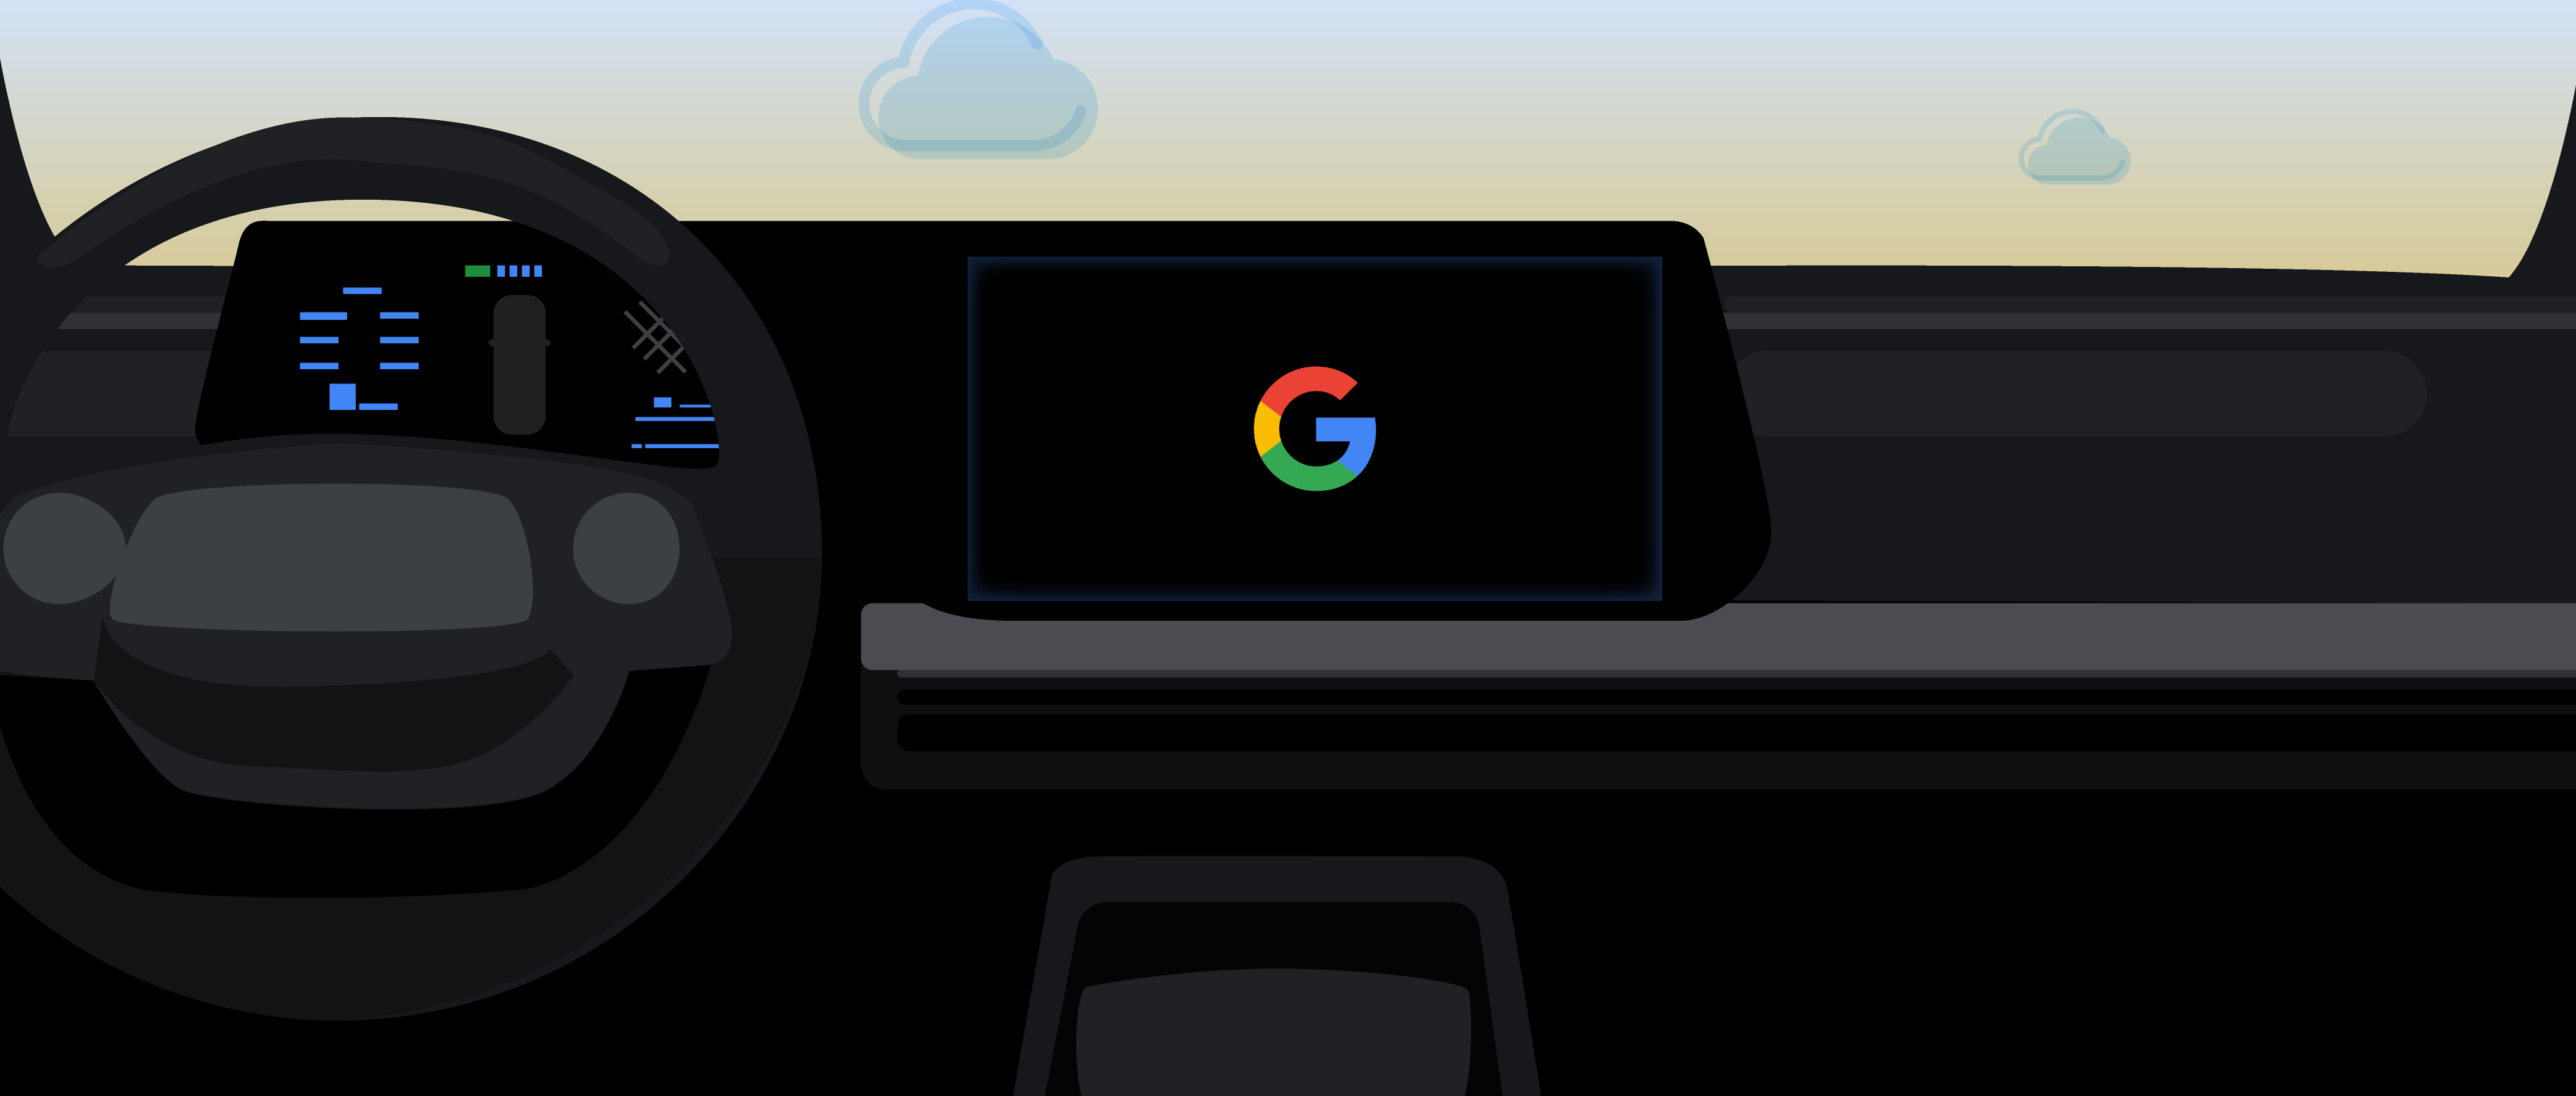 Android for Cars | Google for Developers